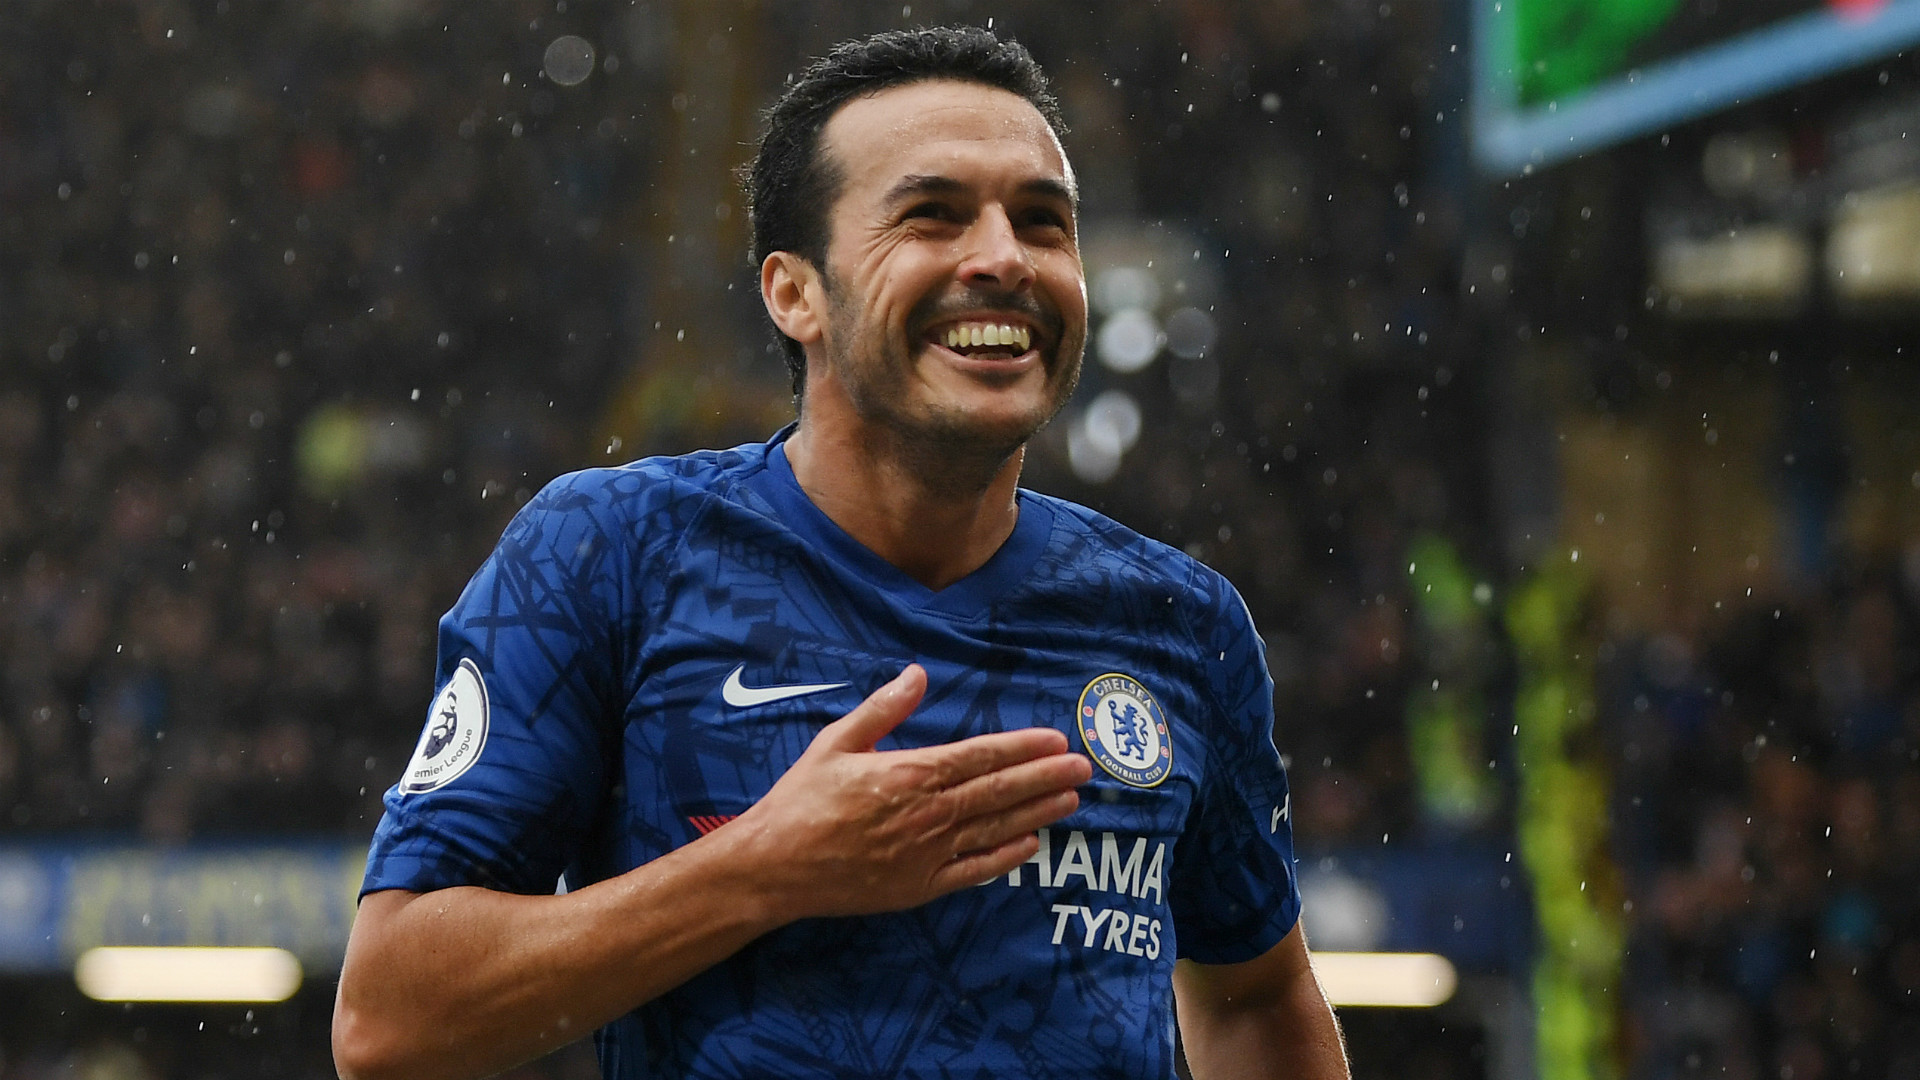 ‘Pedro would be good for MLS despite his age’ – Ex-Chelsea star Burley backs World Cup winner for move